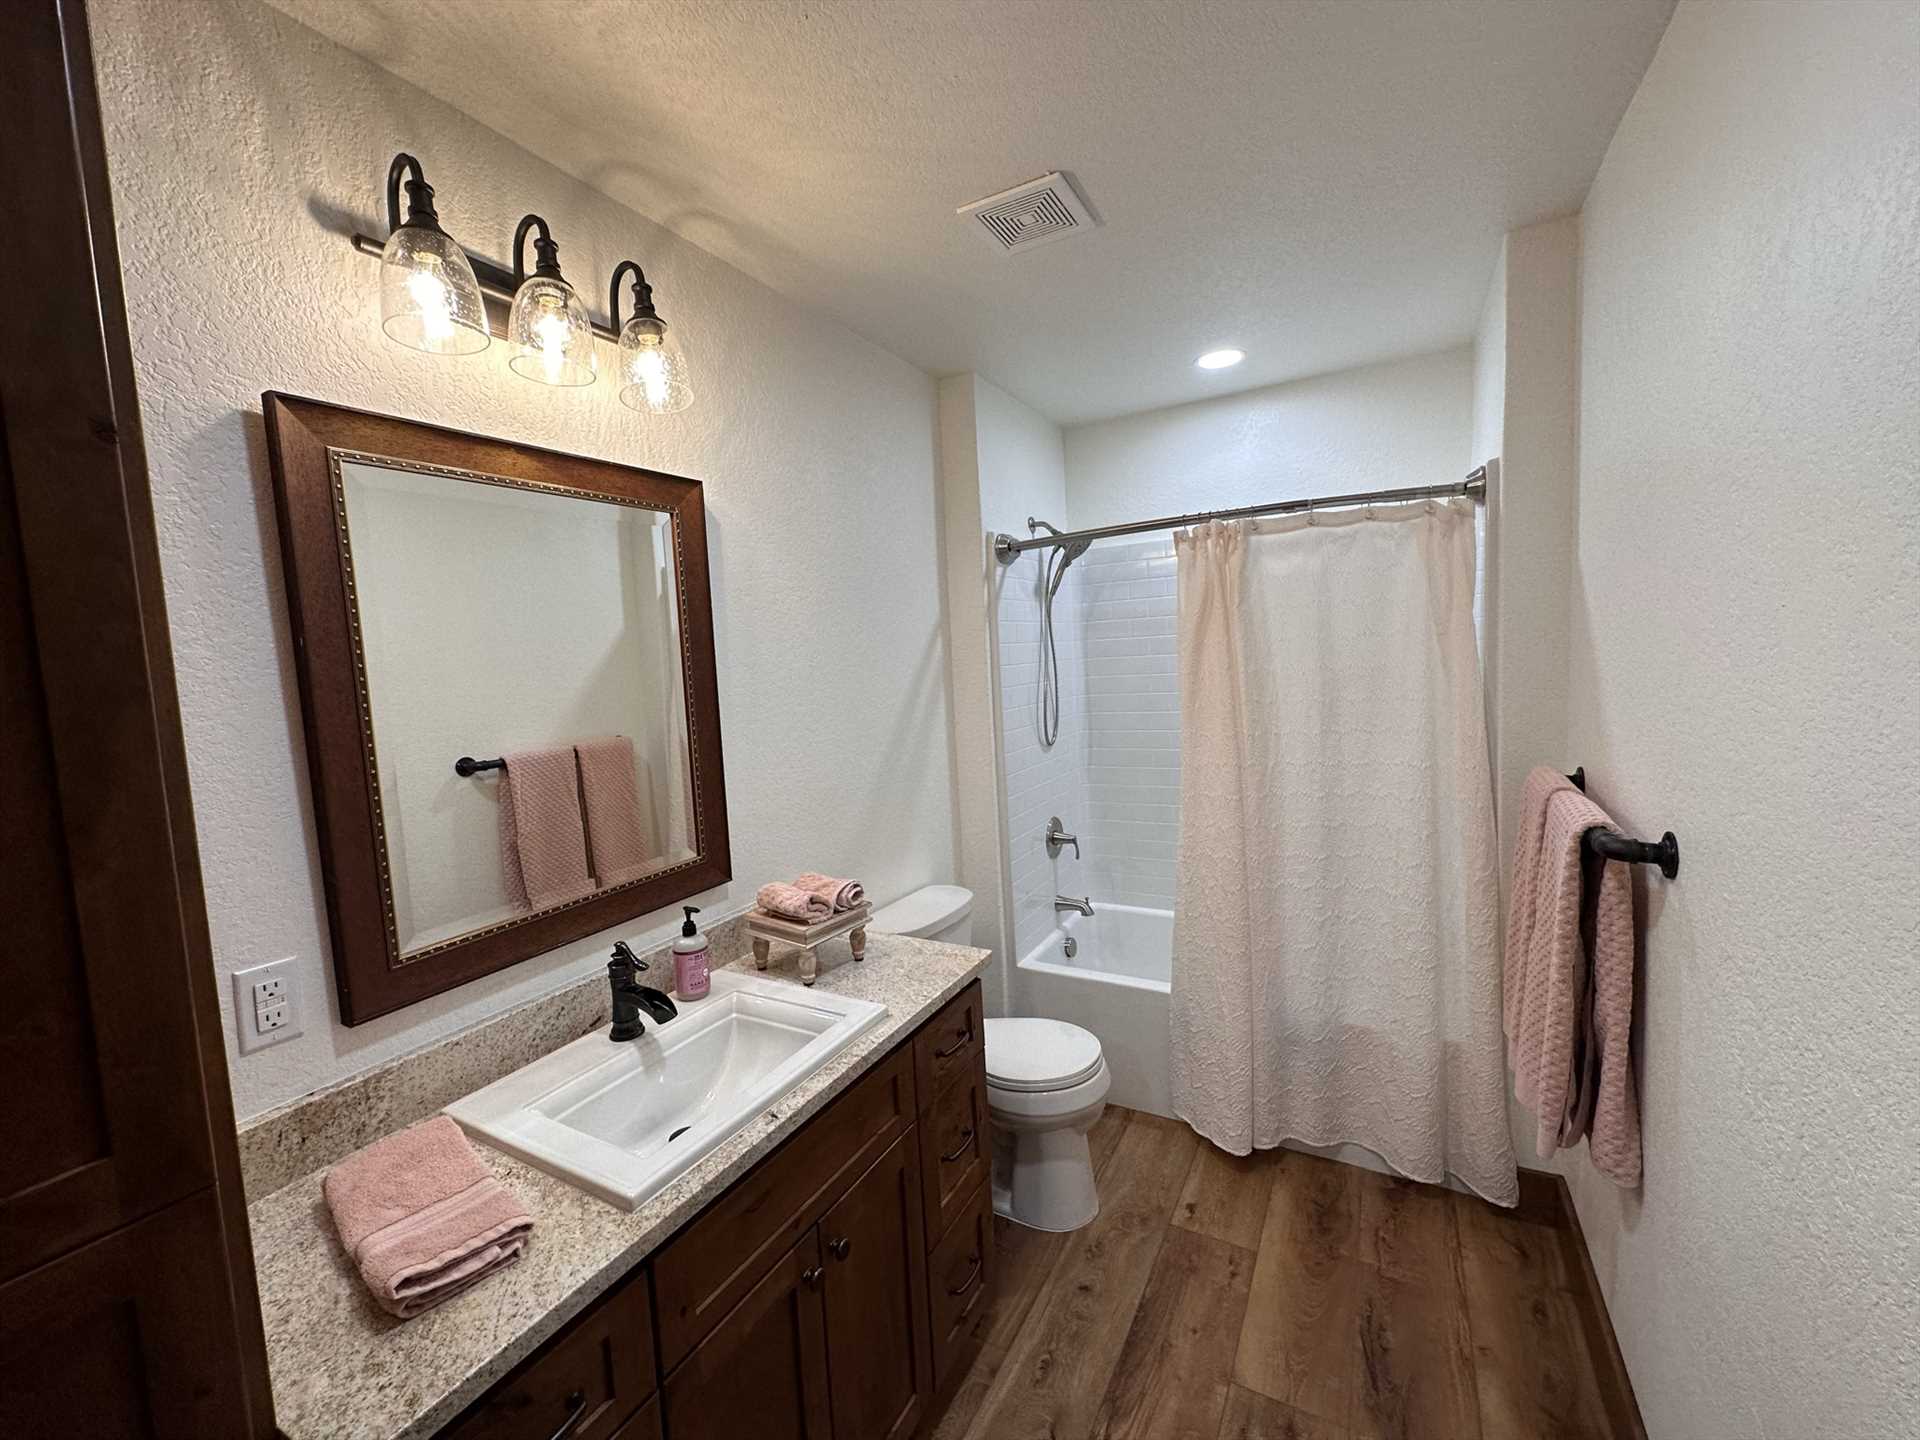                                                 The master bath has its own separate shower and tub, and the other four full baths feature shower and tub combos.